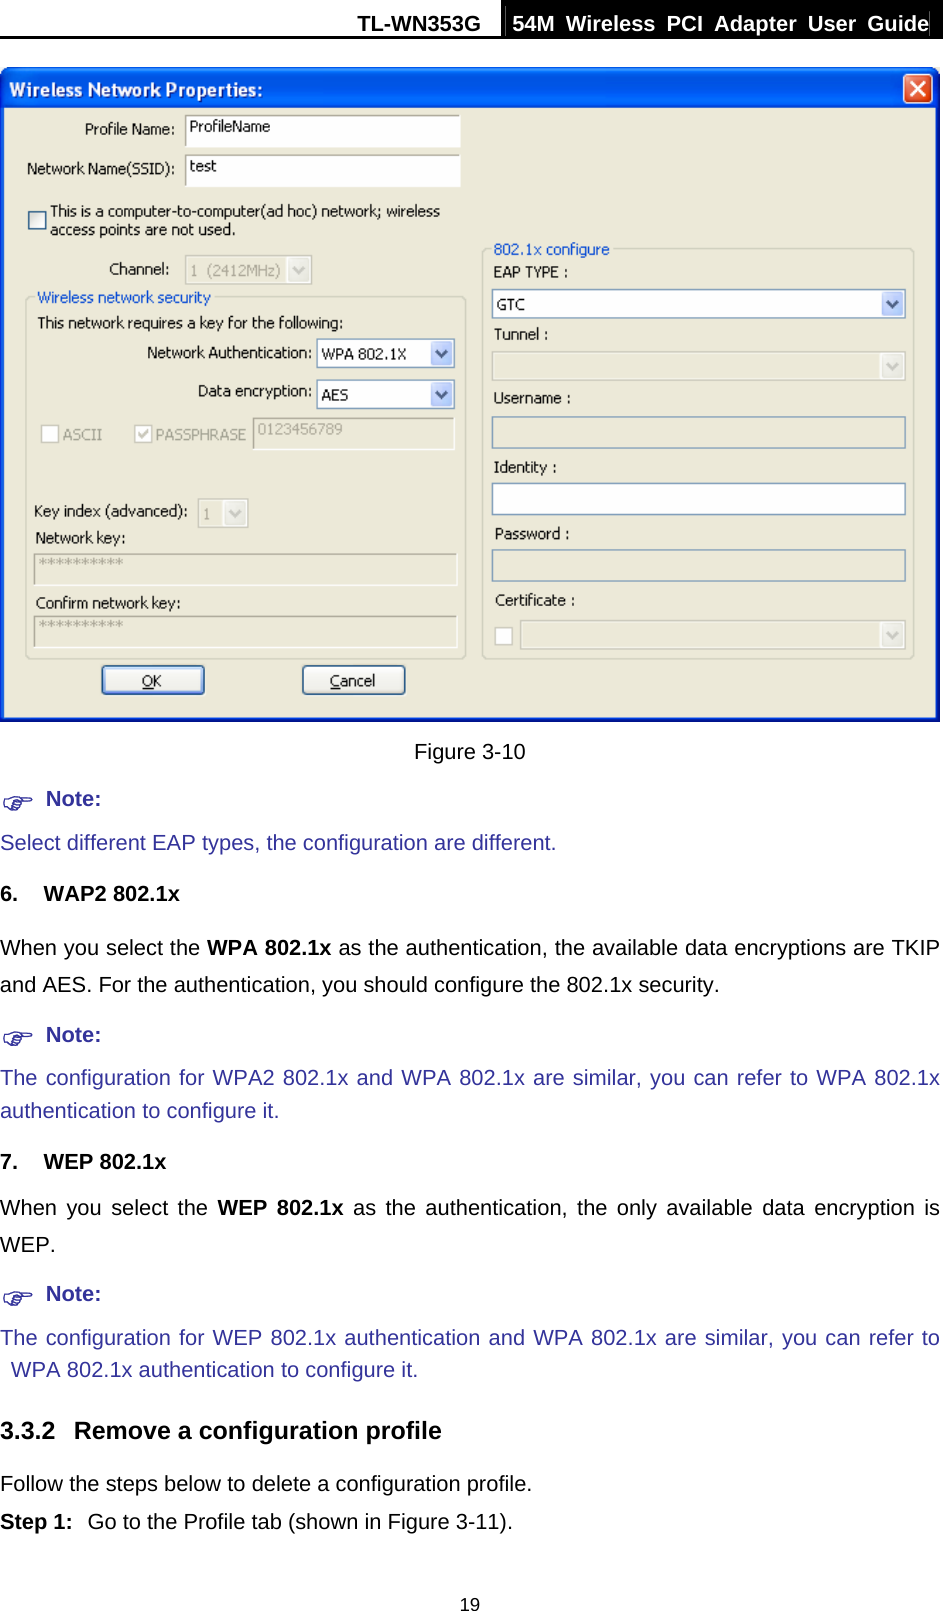 TL-WN353G  54M Wireless PCI Adapter User Guide   19 Figure 3-10 ) Note: Select different EAP types, the configuration are different. 6. WAP2 802.1x When you select the WPA 802.1x as the authentication, the available data encryptions are TKIP and AES. For the authentication, you should configure the 802.1x security. ) Note: The configuration for WPA2 802.1x and WPA 802.1x are similar, you can refer to WPA 802.1x authentication to configure it. 7. WEP 802.1x When you select the WEP 802.1x as the authentication, the only available data encryption is WEP. ) Note: The configuration for WEP 802.1x authentication and WPA 802.1x are similar, you can refer to WPA 802.1x authentication to configure it. 3.3.2  Remove a configuration profile Follow the steps below to delete a configuration profile. Step 1:  Go to the Profile tab (shown in Figure 3-11). 